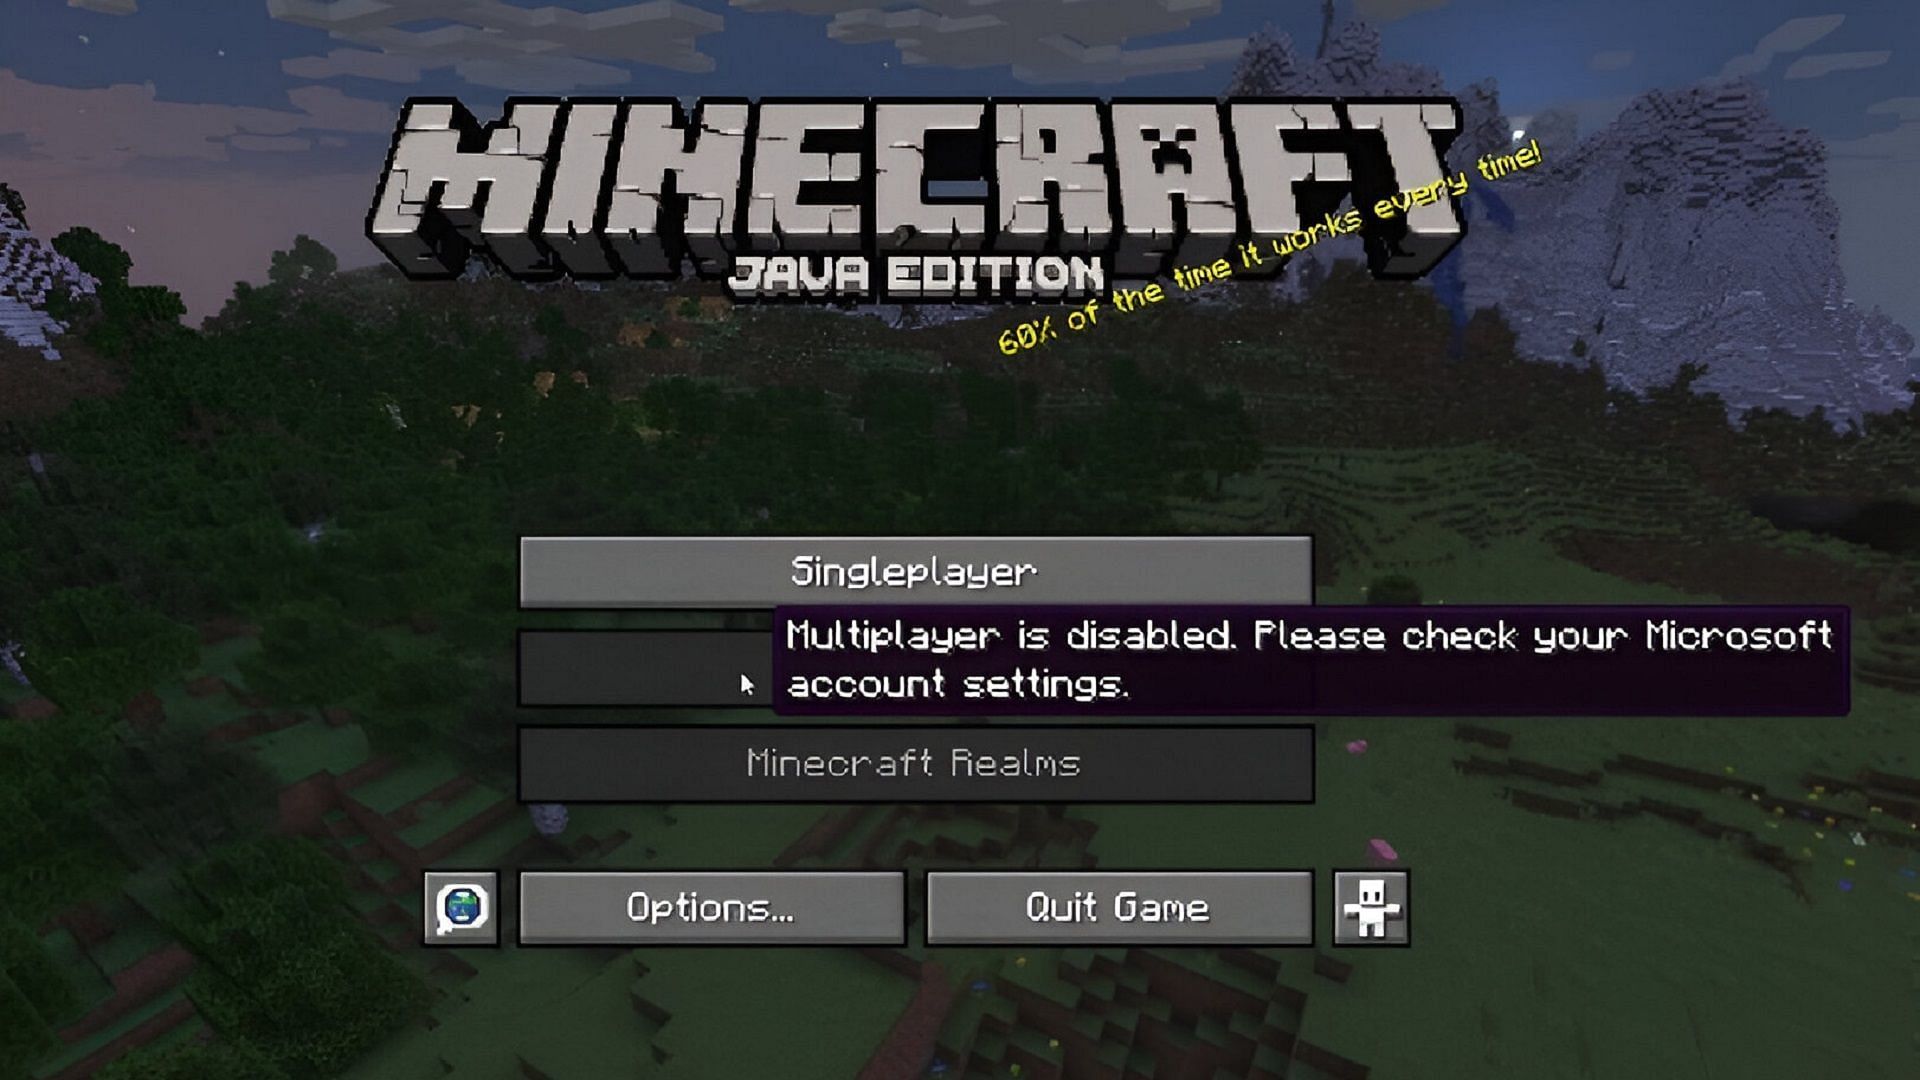 Minecraft has a full host of parental controls that can be used via Microsoft